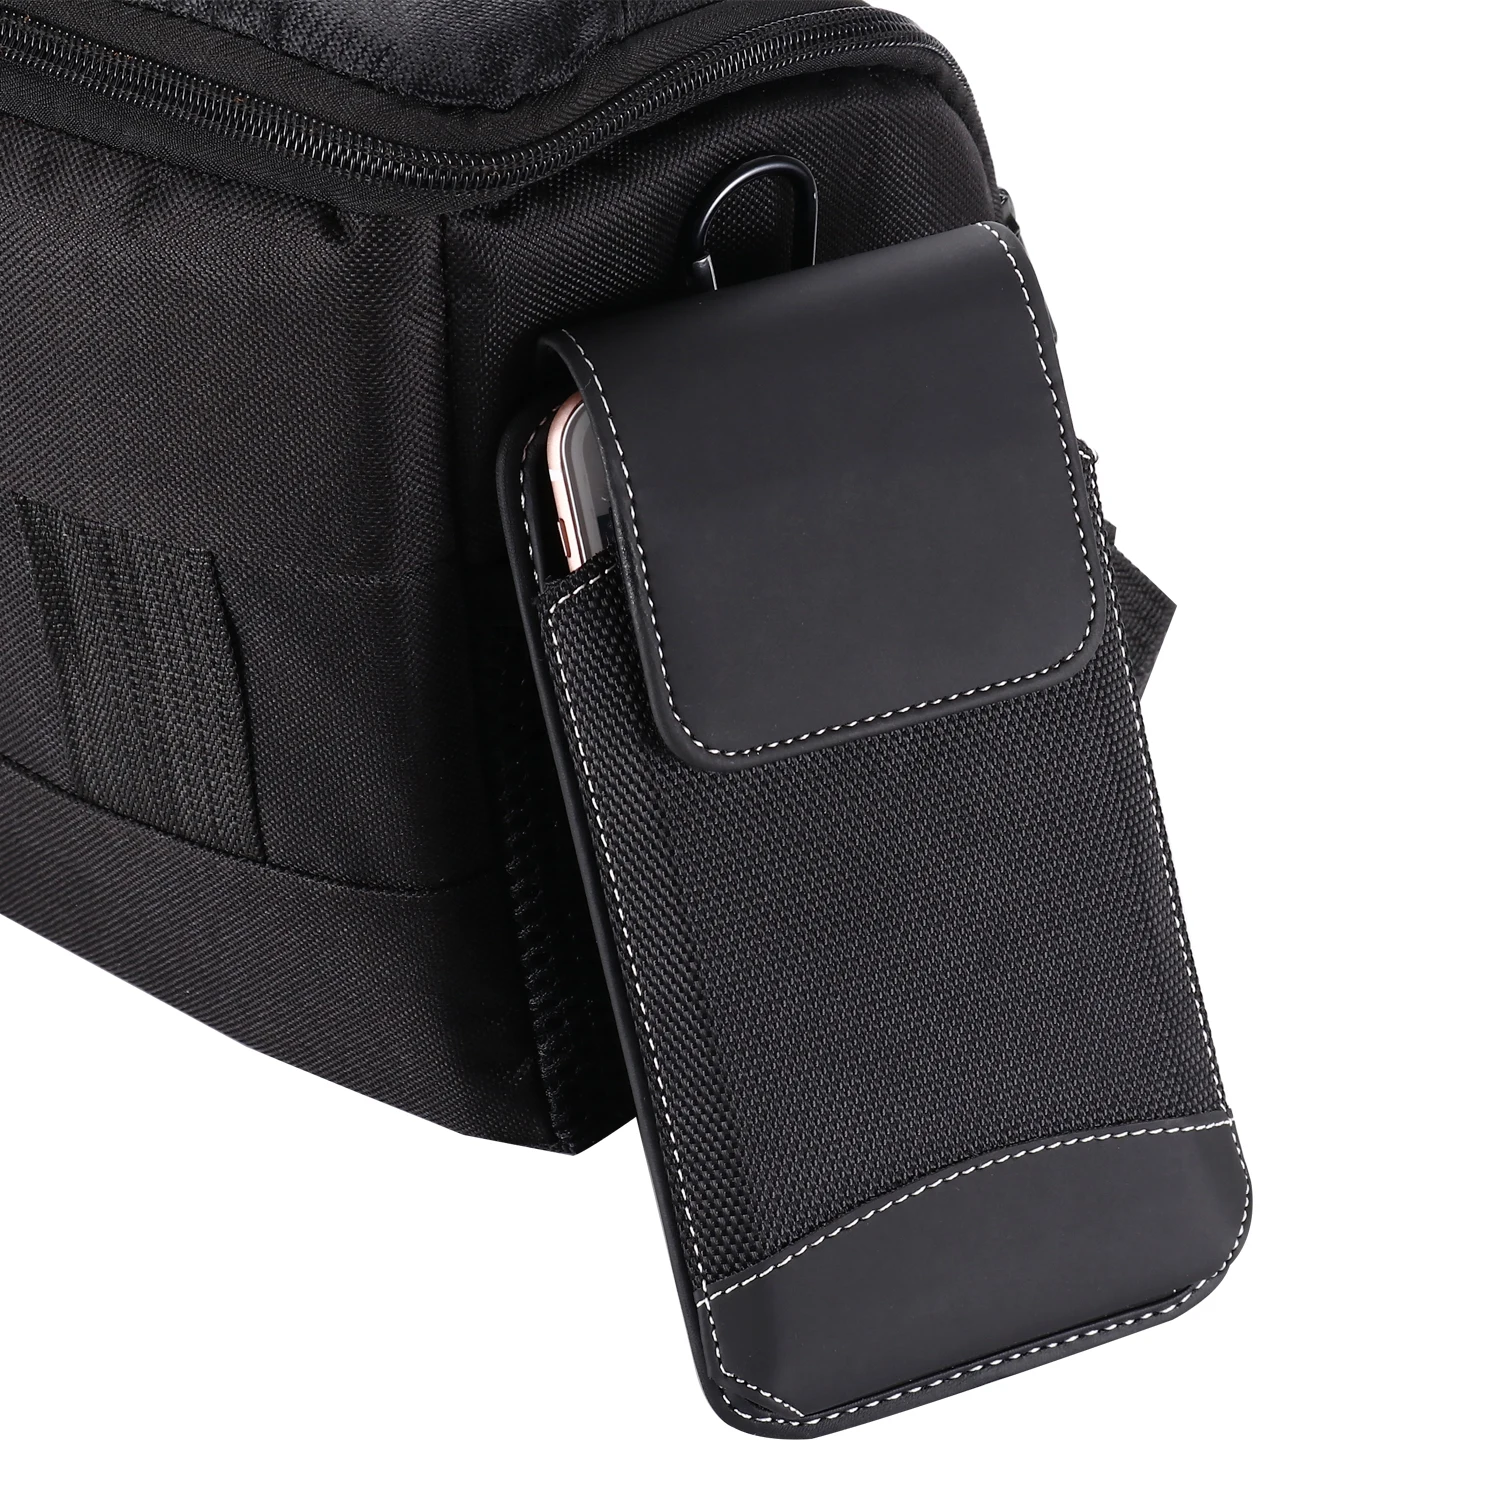 Universal Phone Pouch for iphone 12 Samsung Note 20 Ultra xiaomi POCO X3 moto LG Nokia oneplus enim Belt Clip Holster Waist Bag iphone 8 plus wallet case